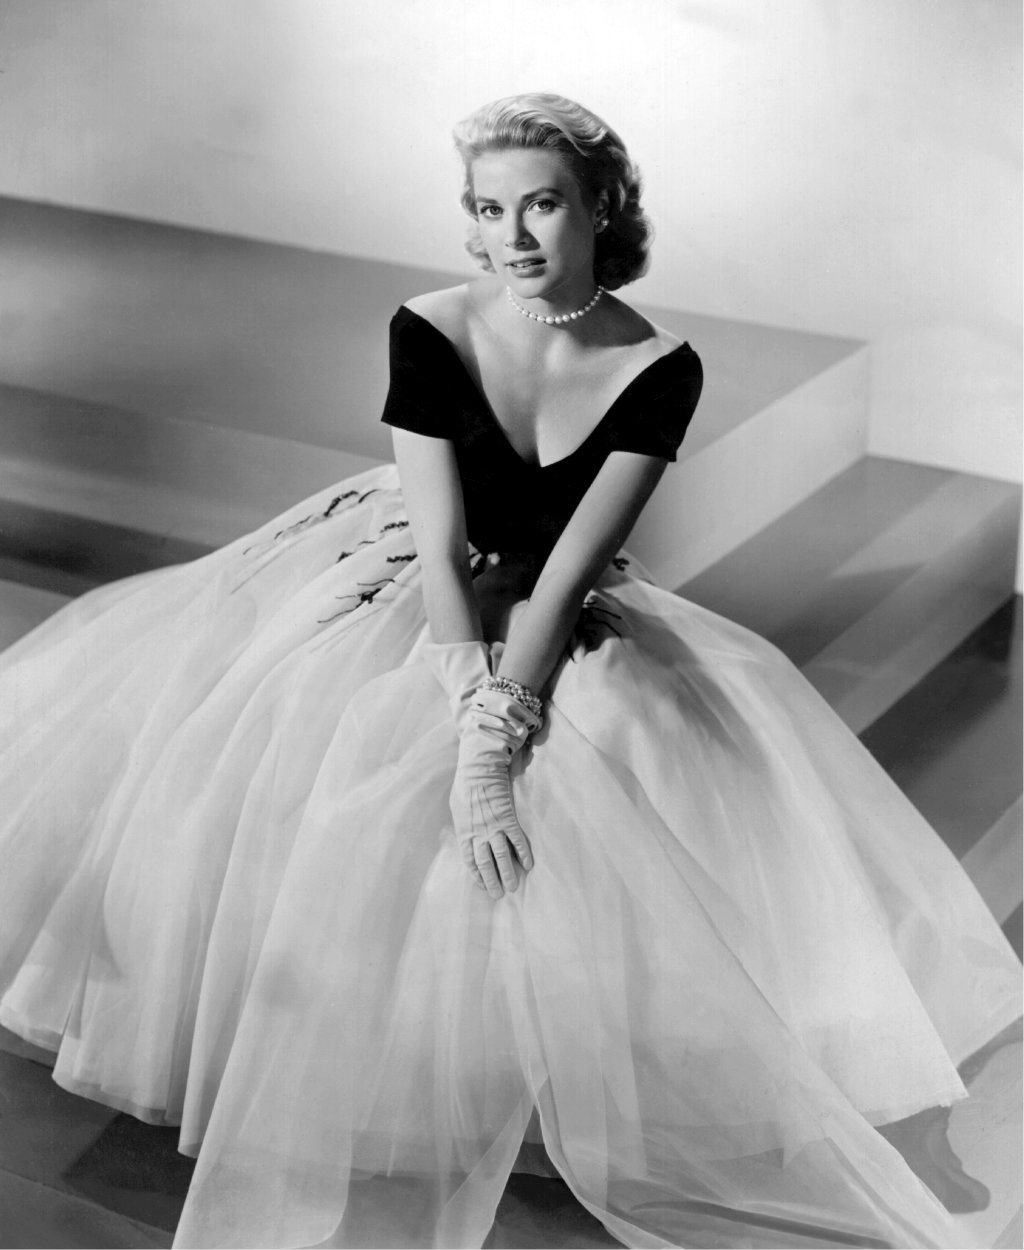 Grace Kelly photo 335 of 437 pics, wallpaper - photo #385058 - ThePlace2